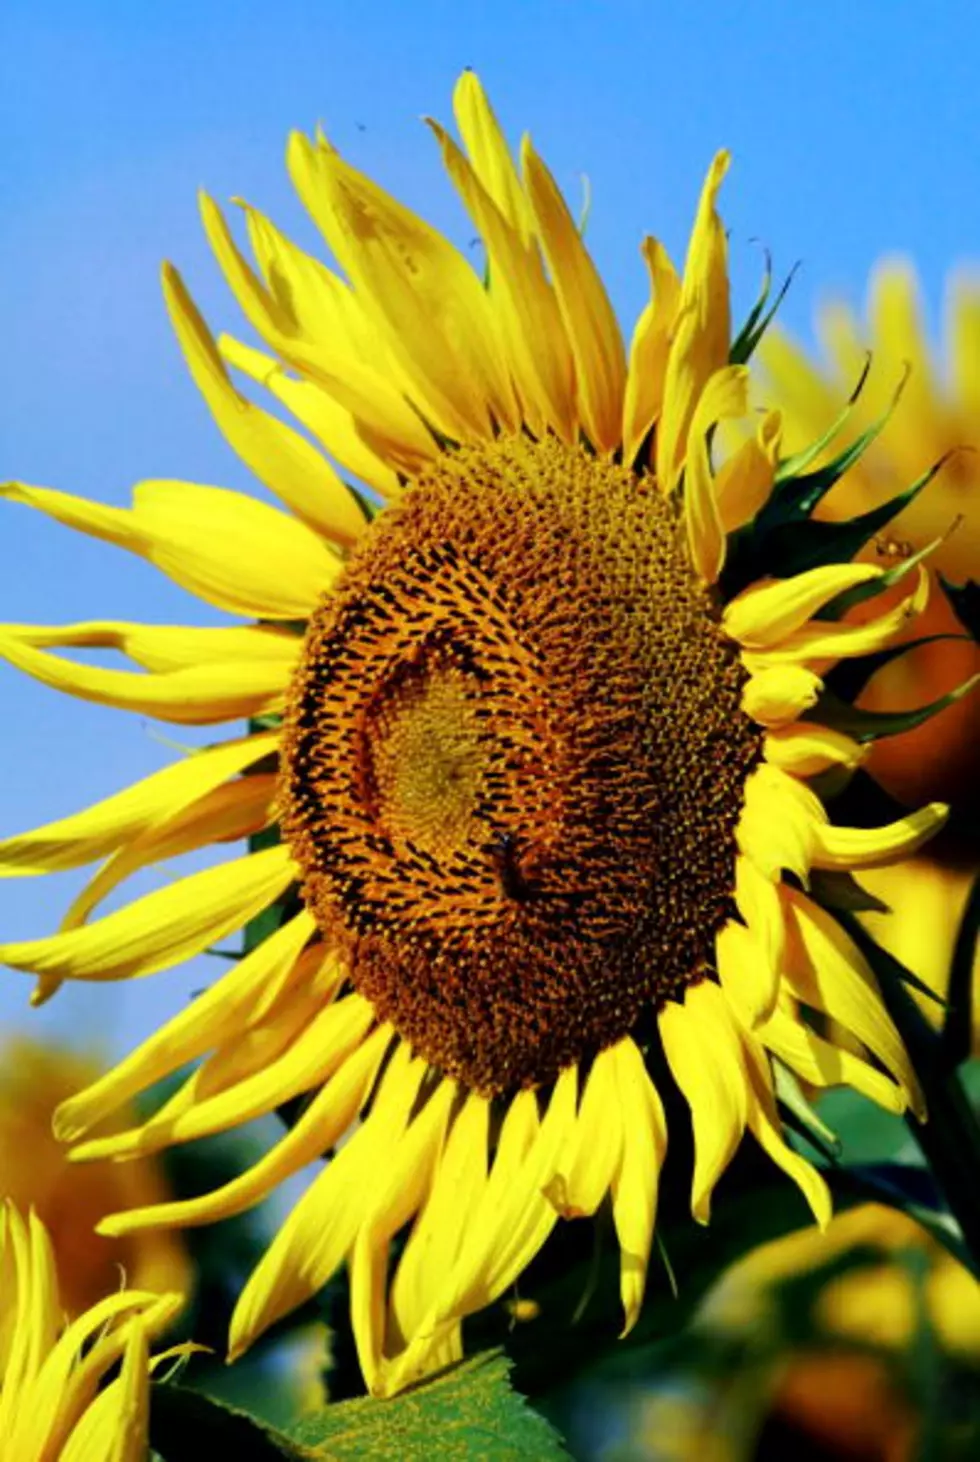 Trespassers Steal Flowers and Cause Damage at Sunflowers of Sanborn